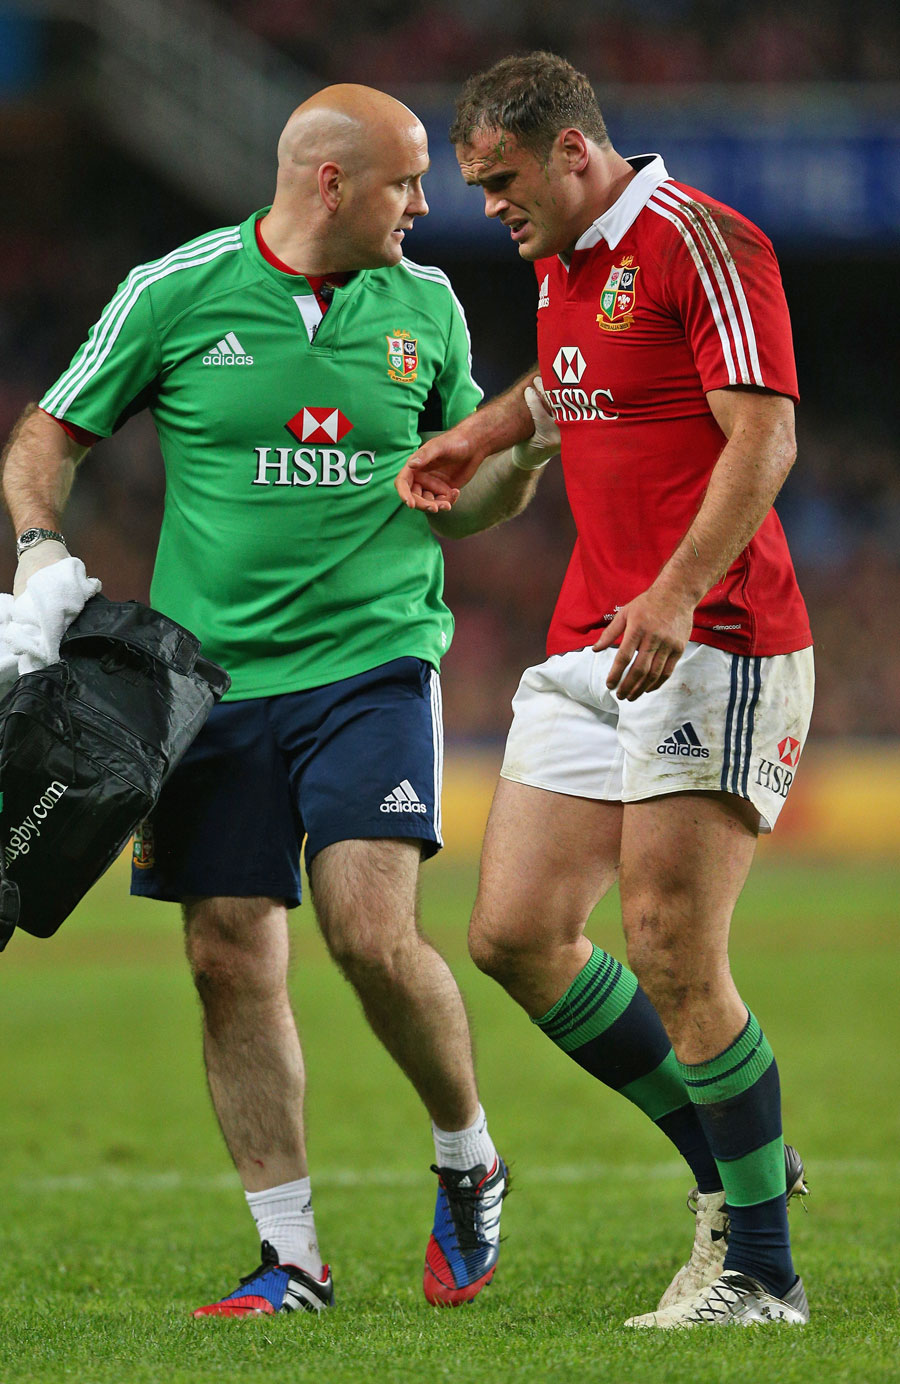 Lions centre Jamie Roberts hobbles from the field